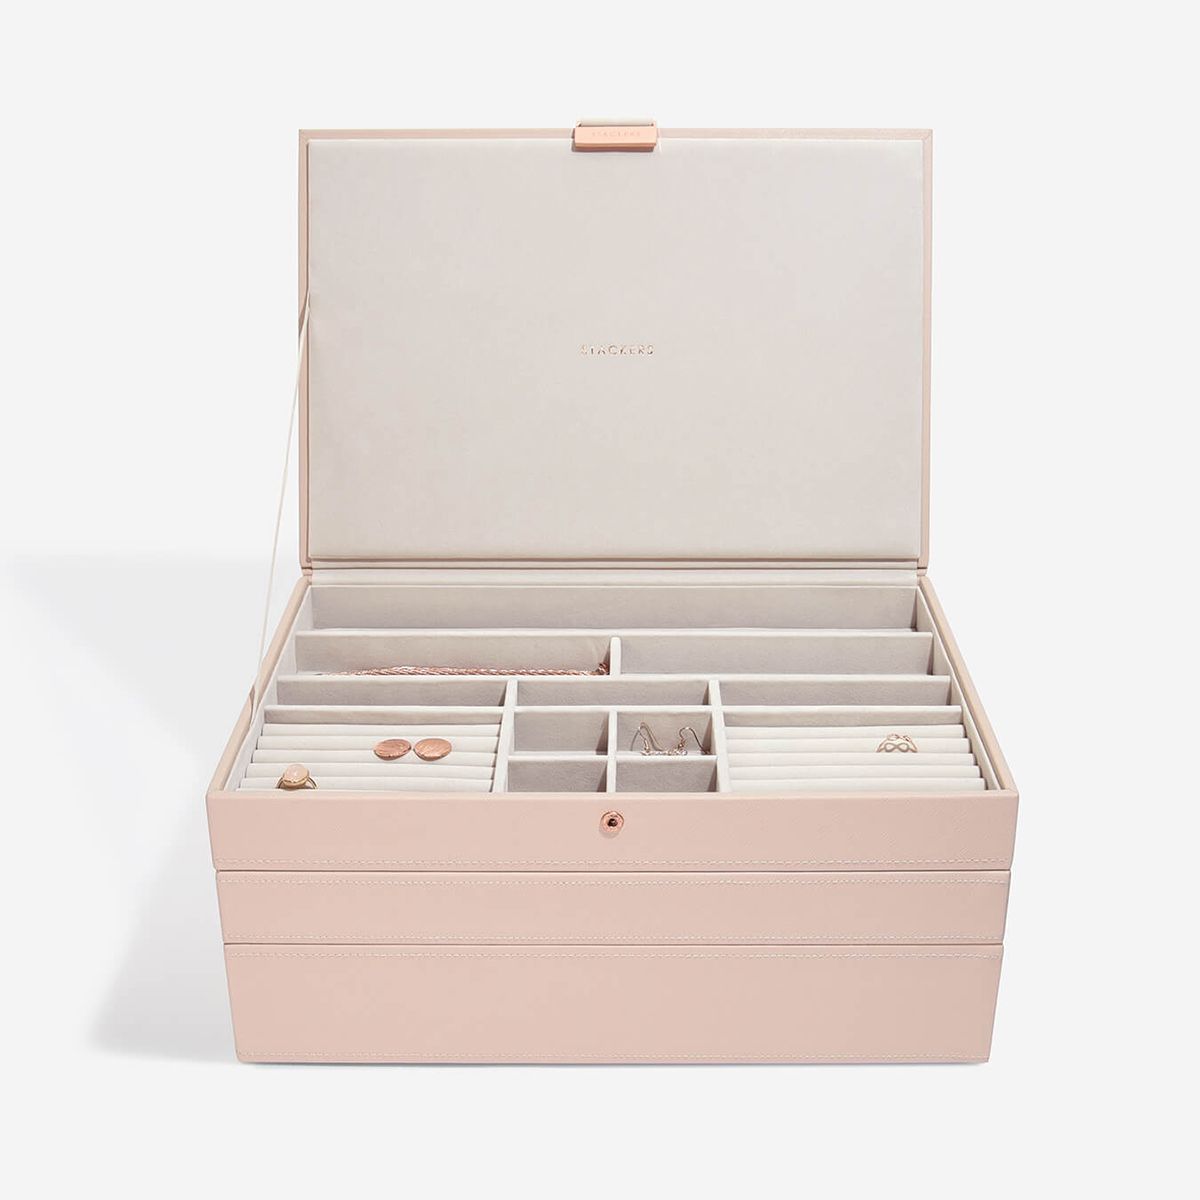 Stackers Supersize Jewelry Box Starter Set Blush Set of 3 | The Container Store